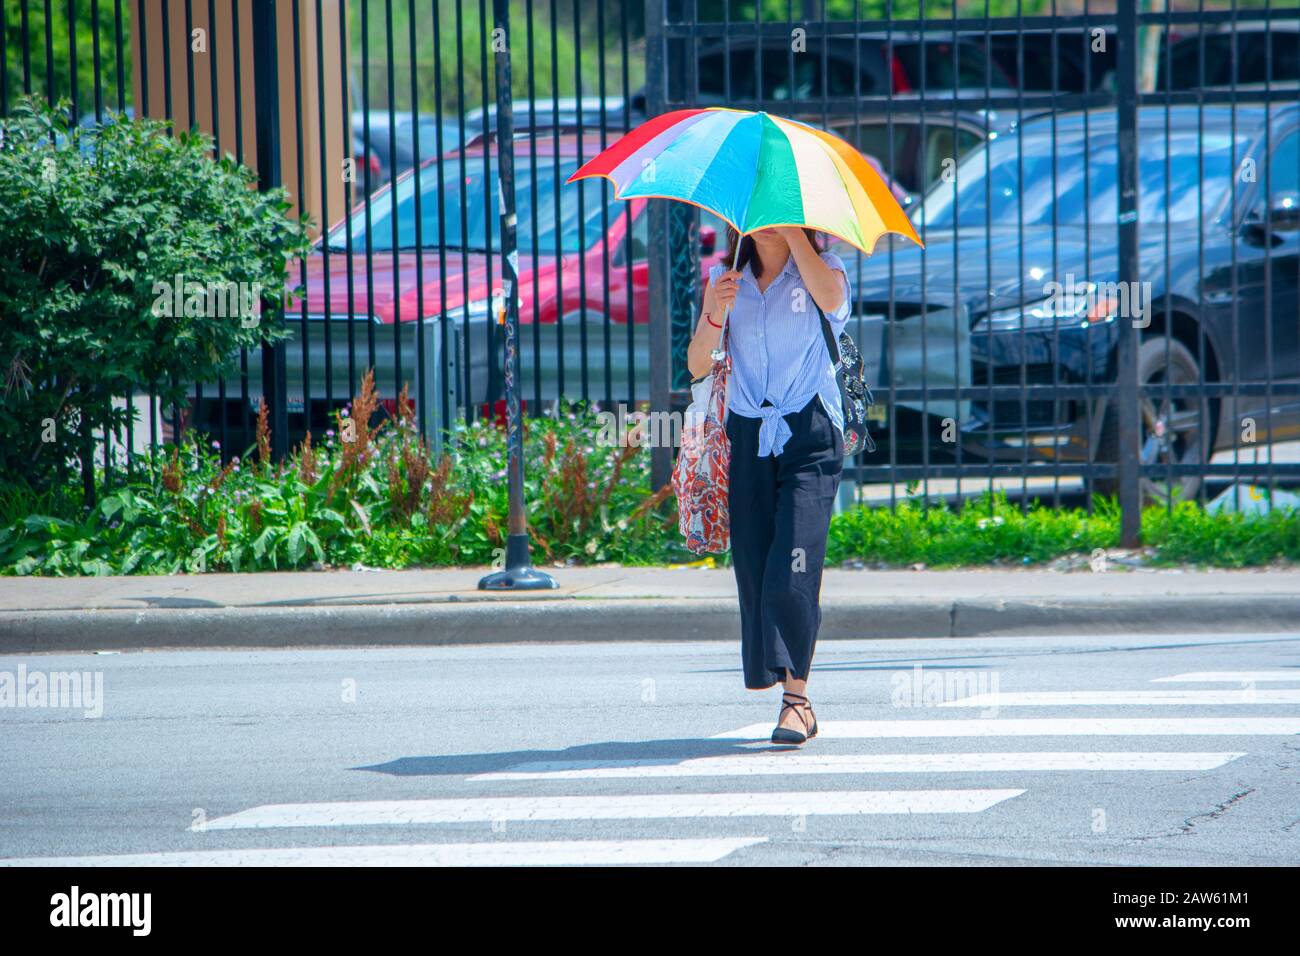 A young lady uses a colorful rainbow umbrella to shield herself from the suns she crosses the street in Chicago's Chinatown Stock Photo